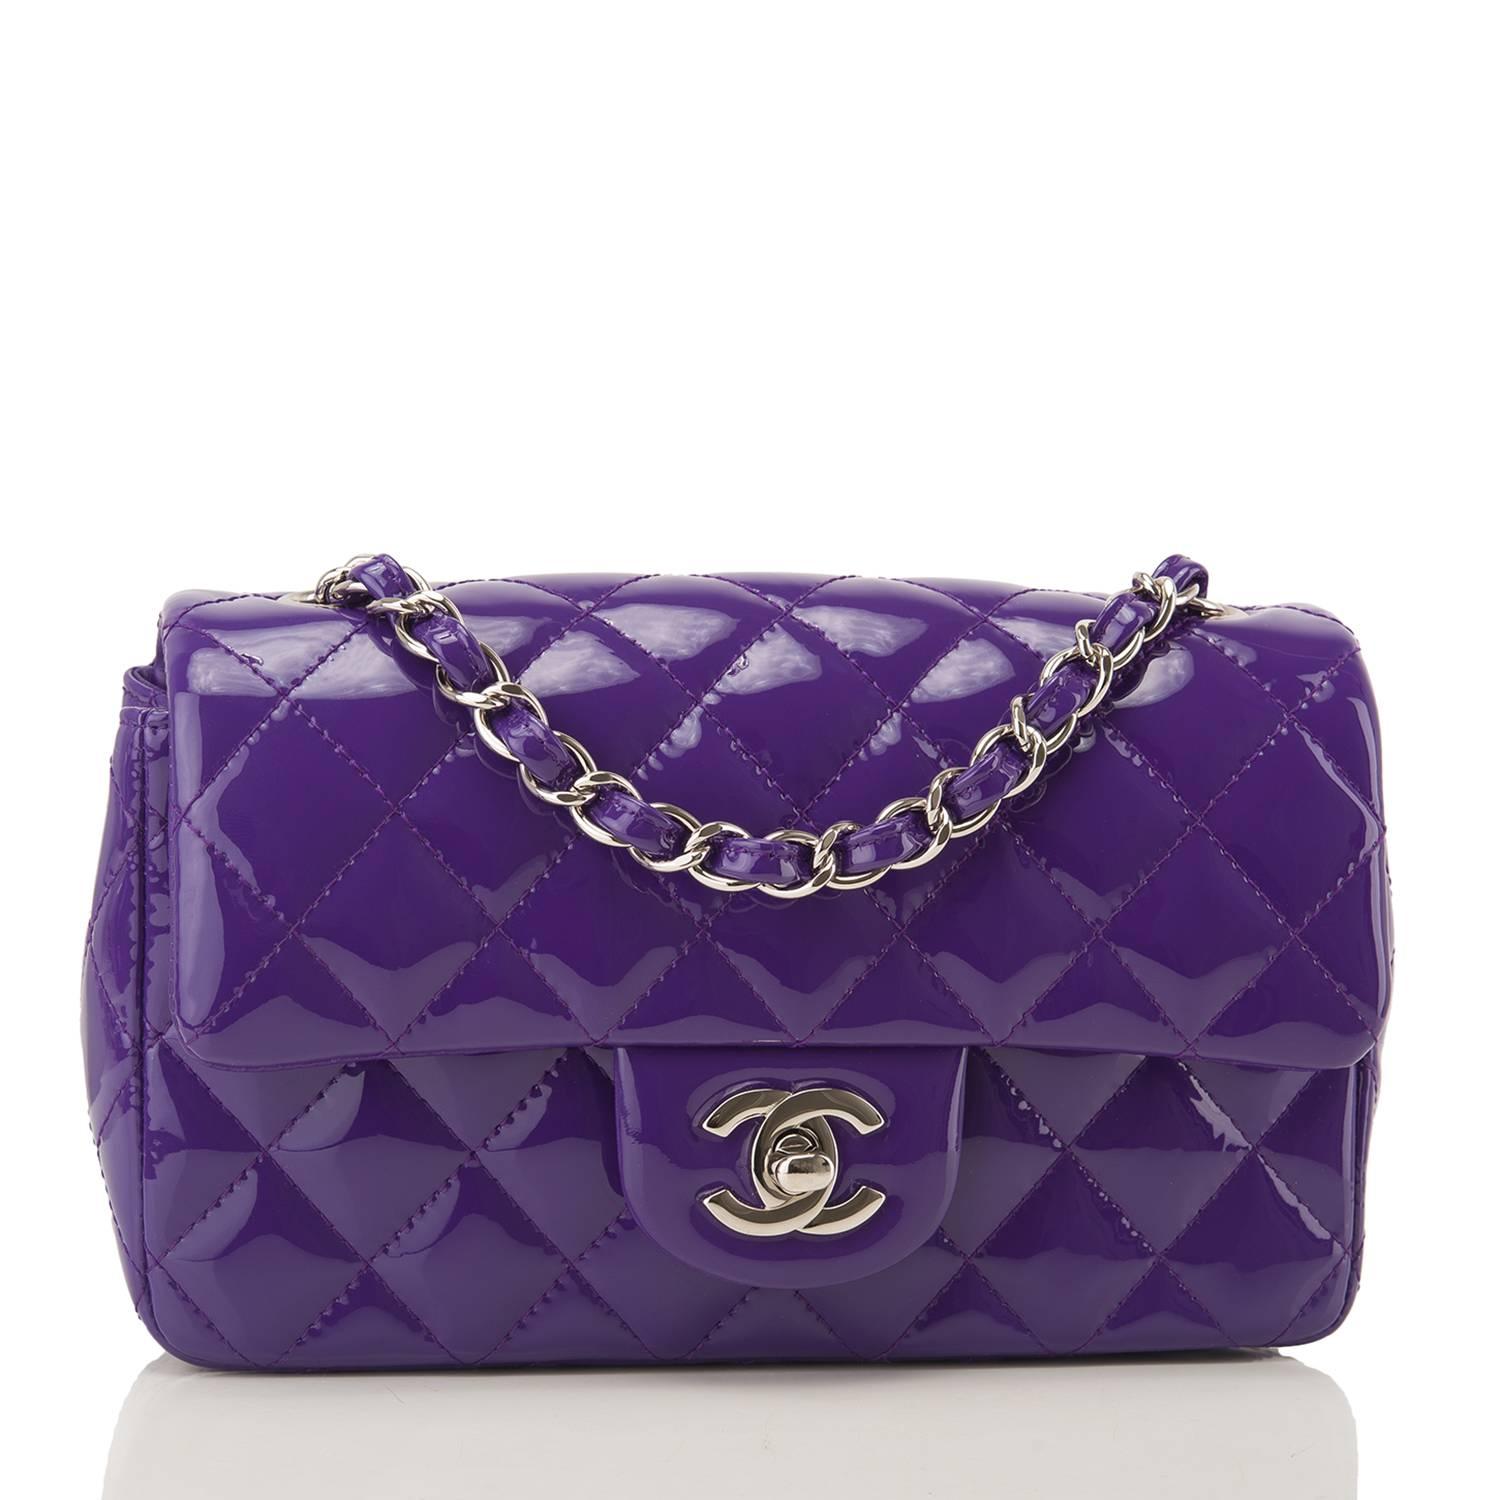 Chanel Rectangular Mini Classic flap bag of purple patent leather with silver tone hardware.

This bag has a front flap with signature CC turnlock closure, rear half moon pocket and single interwoven purple leather and silver tone chain link